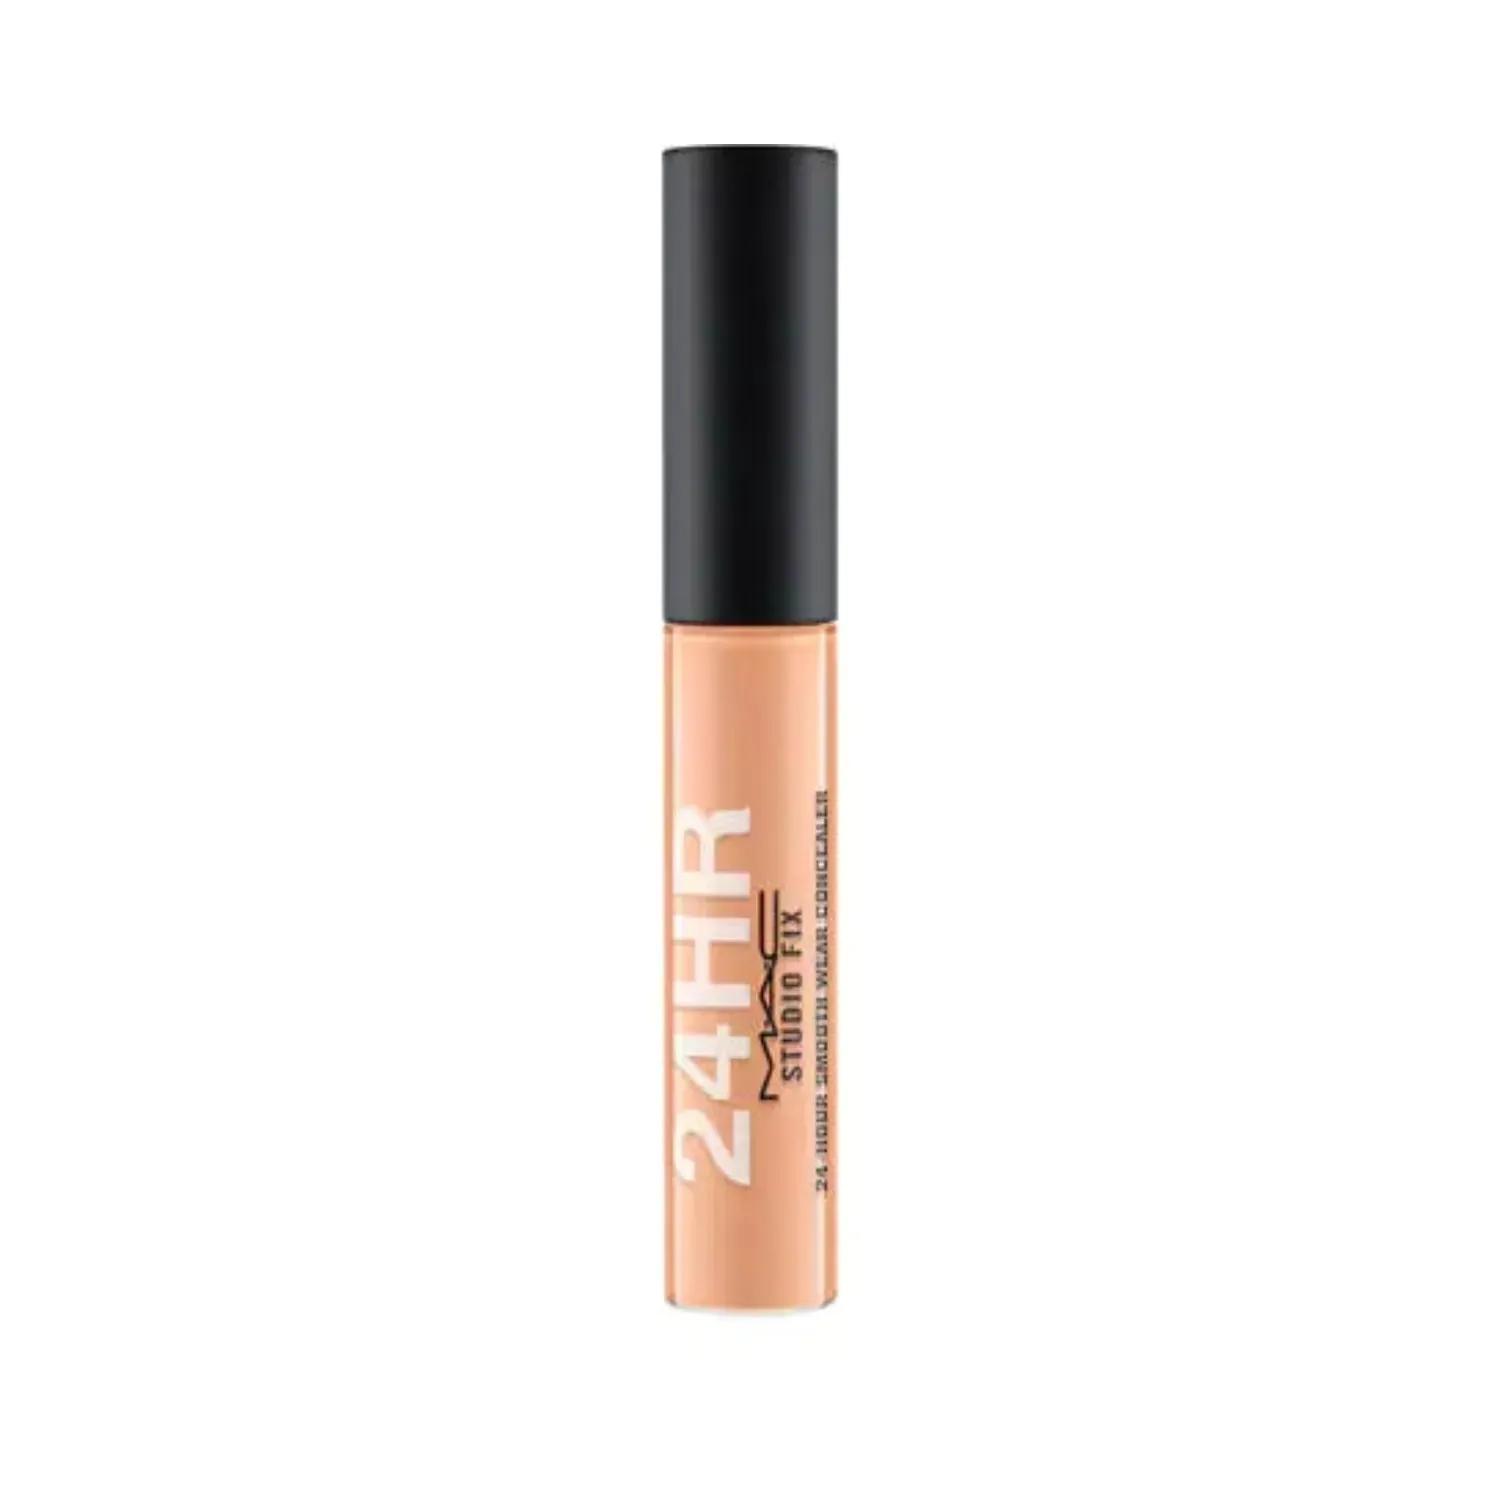 m.a.c studio fix 24-hour smooth wear concealer - nw35 (7ml)